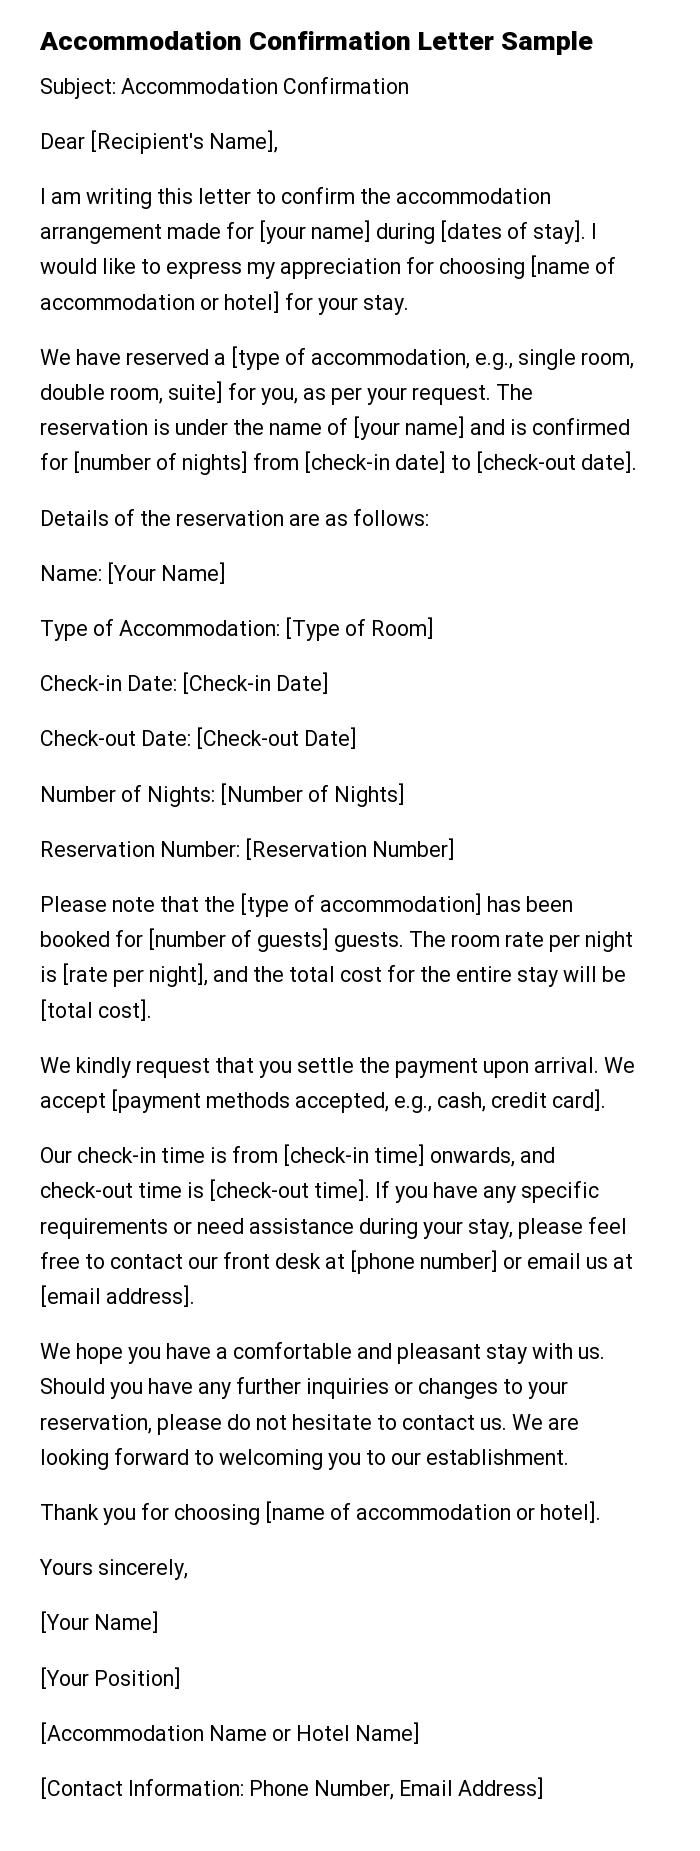 Accommodation Confirmation Letter Sample